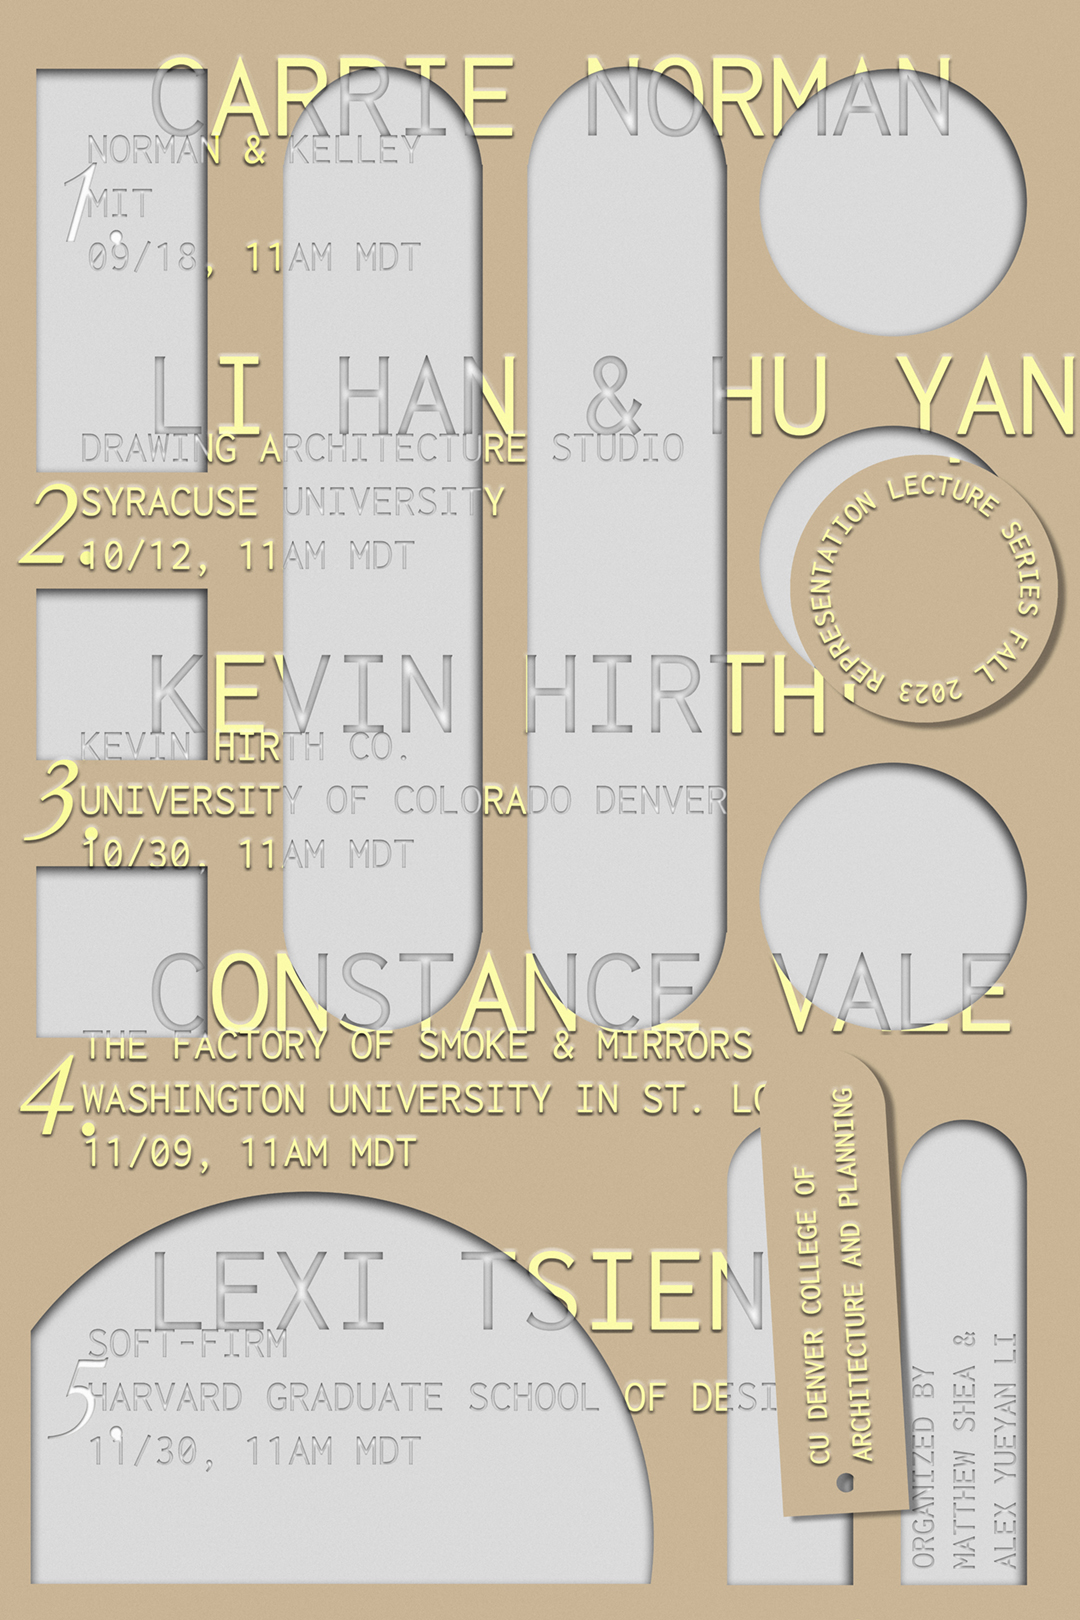 Fall 2023 Representation Lecture Series featuring the following speakers (text in yellow and grey) Carrie Norman, Li Han and Hu Yan, Kevin Hirth, Constance Vale, and Lexi Tsien.